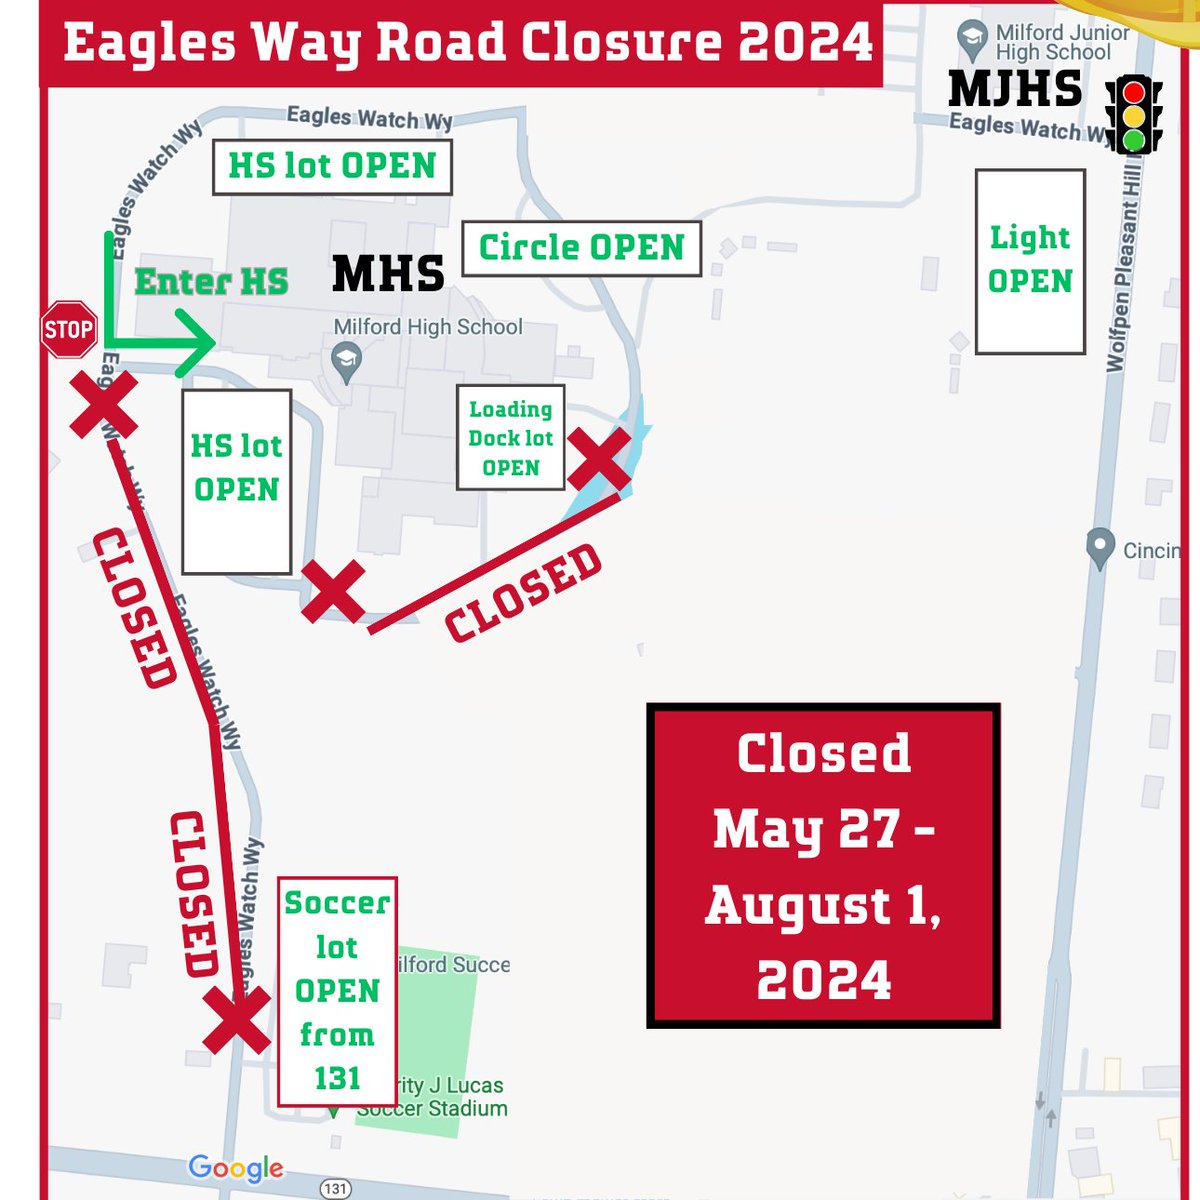 👷👷We are improving safety and traffic flow on Eagles Way starting Tuesday👷👷 Thanks for your patience! MJHS and MHS will only be accessible from Wolfpen. All parking lots are open, including the soccer lot at Charity Lucas. Learn more: bit.ly/EaglesWaySumme… @Milford_Super